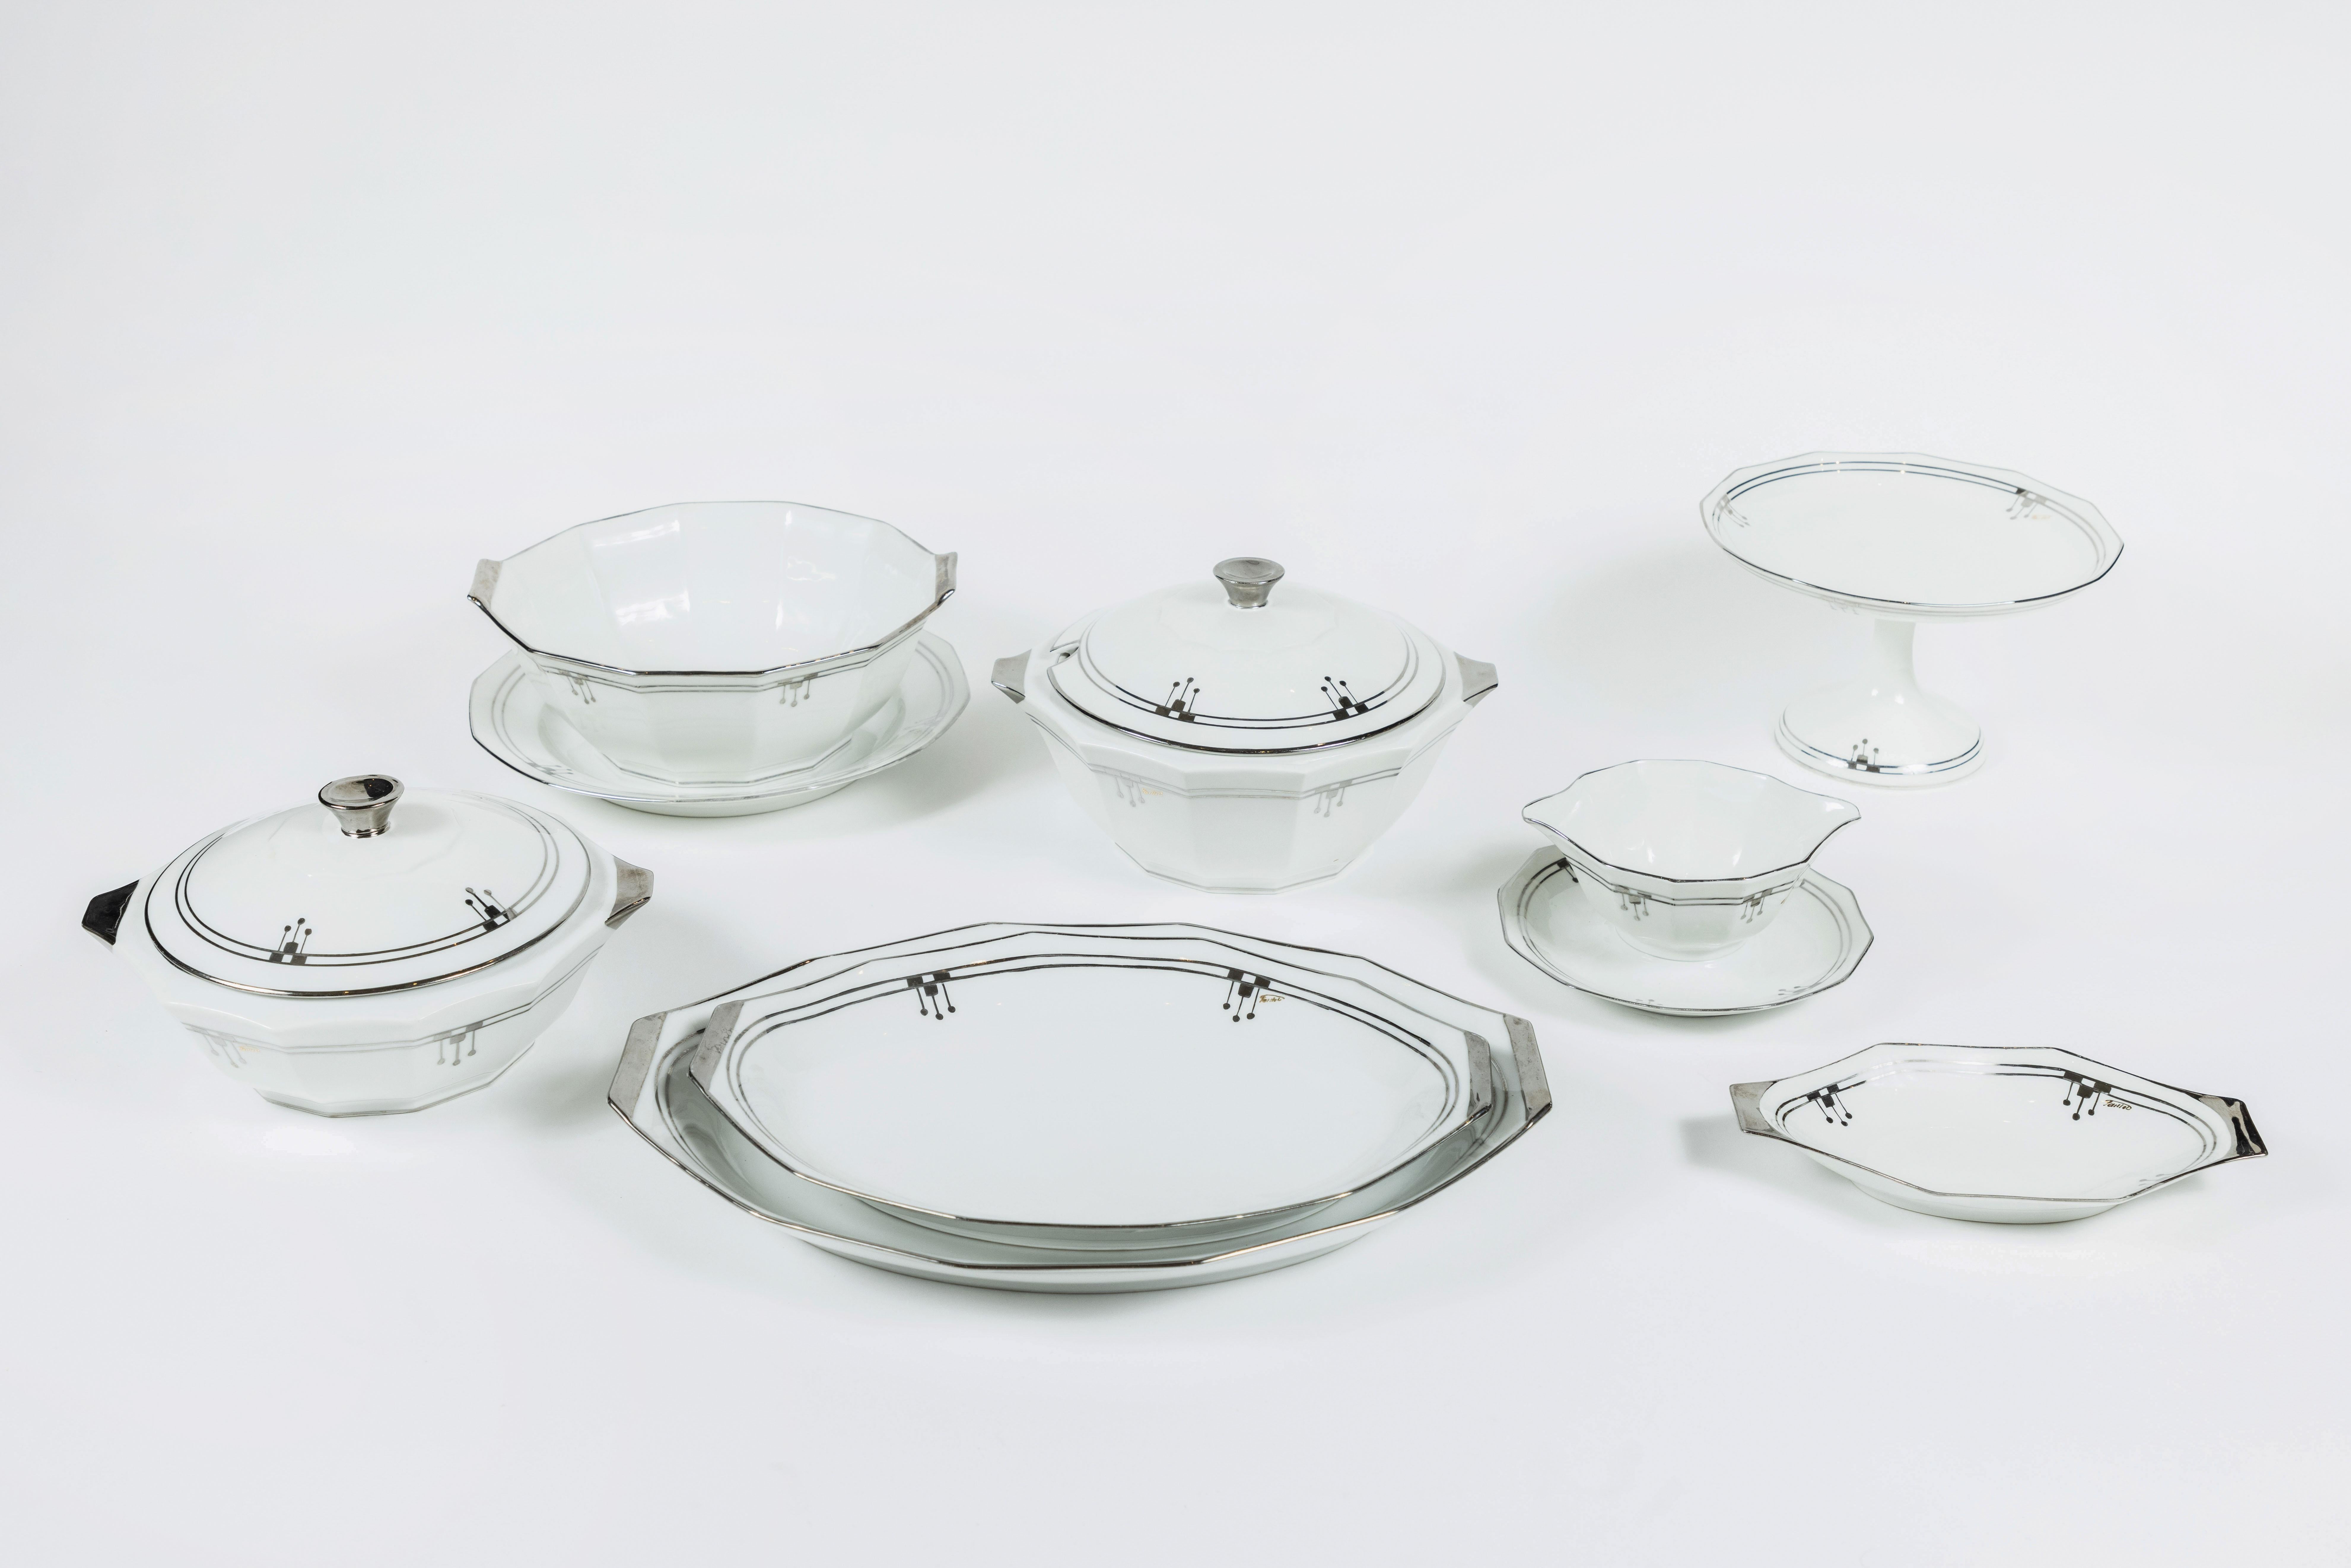 Here is an elegant old Limoges 'Unique' China set of 9 serving pieces in a bold Art Deco style - clean white china with shiny platinum edge design detailing.
This set includes: covered casserole, tureen, serving bowl , sauce bowl, compote, round